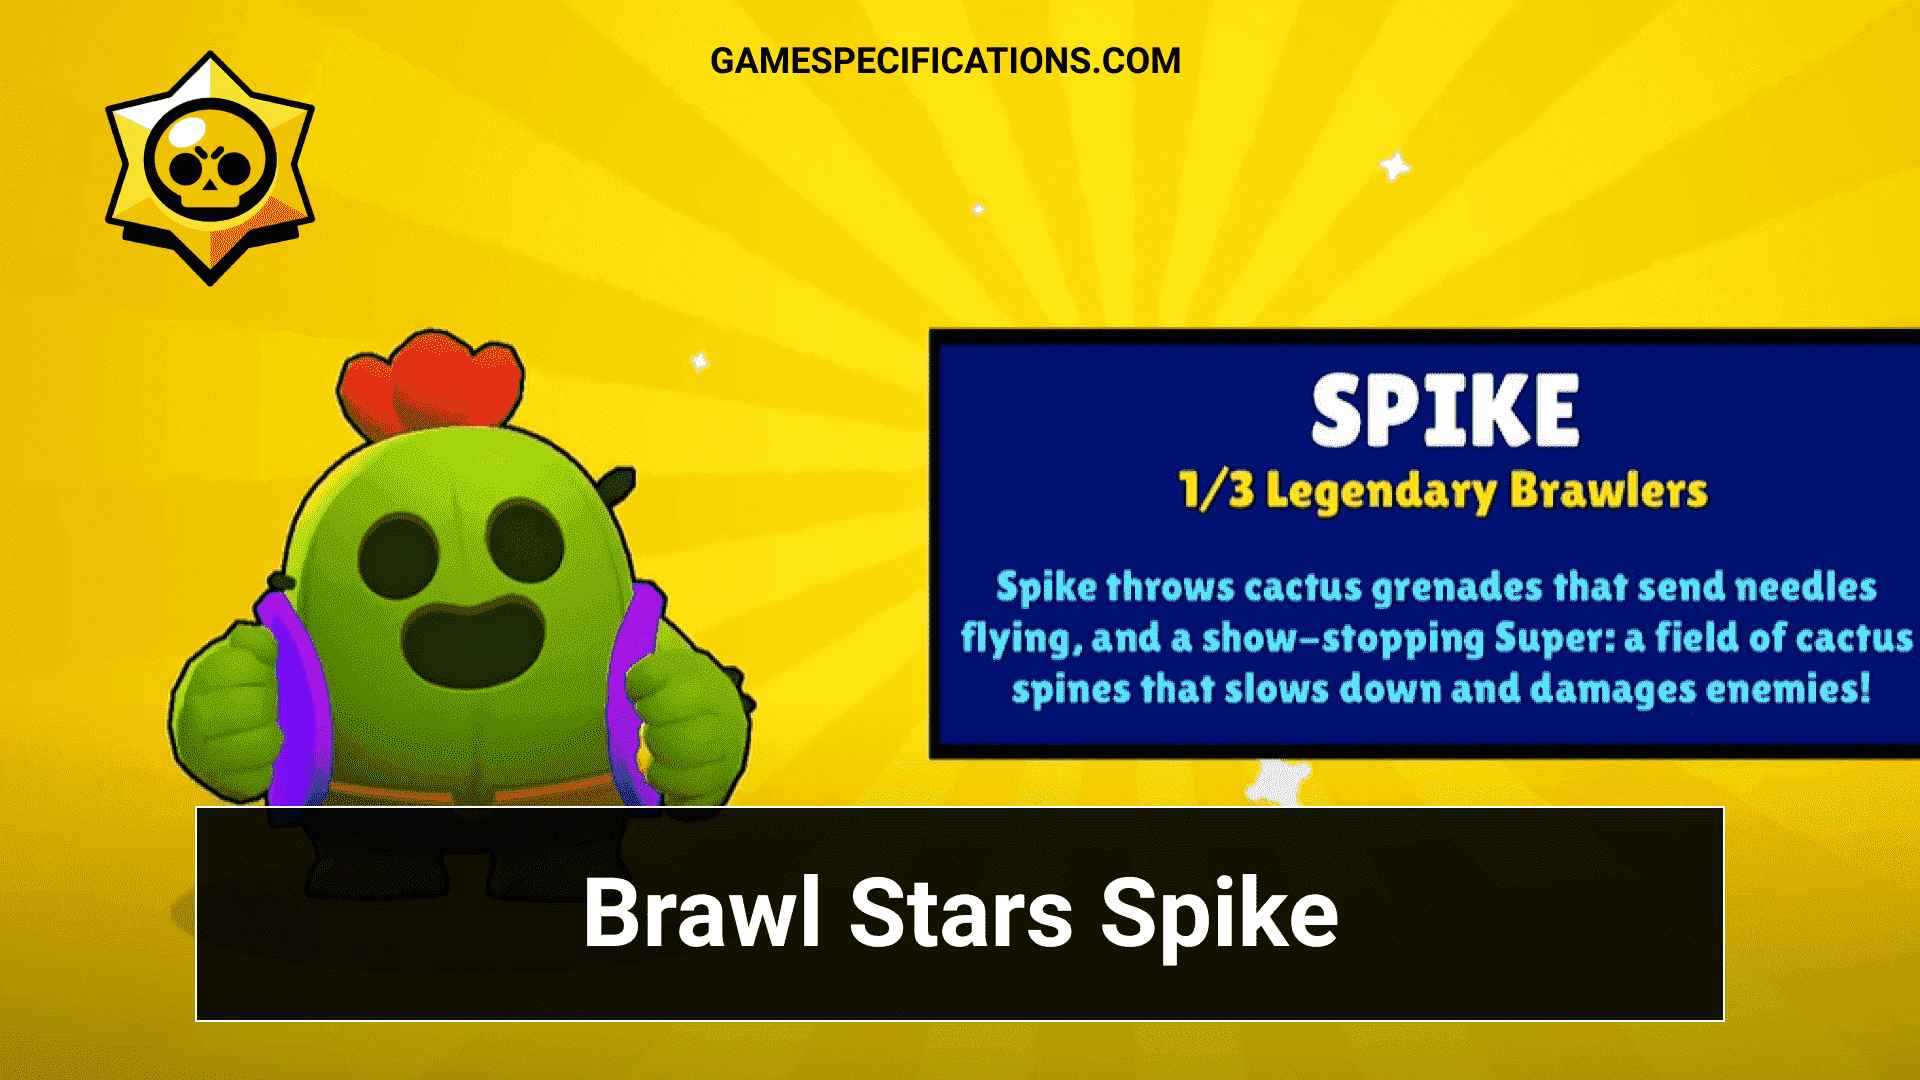 Brawl Stars Spike Introducing The Legendary Character In The Game Game Specifications - brawl stars legendair